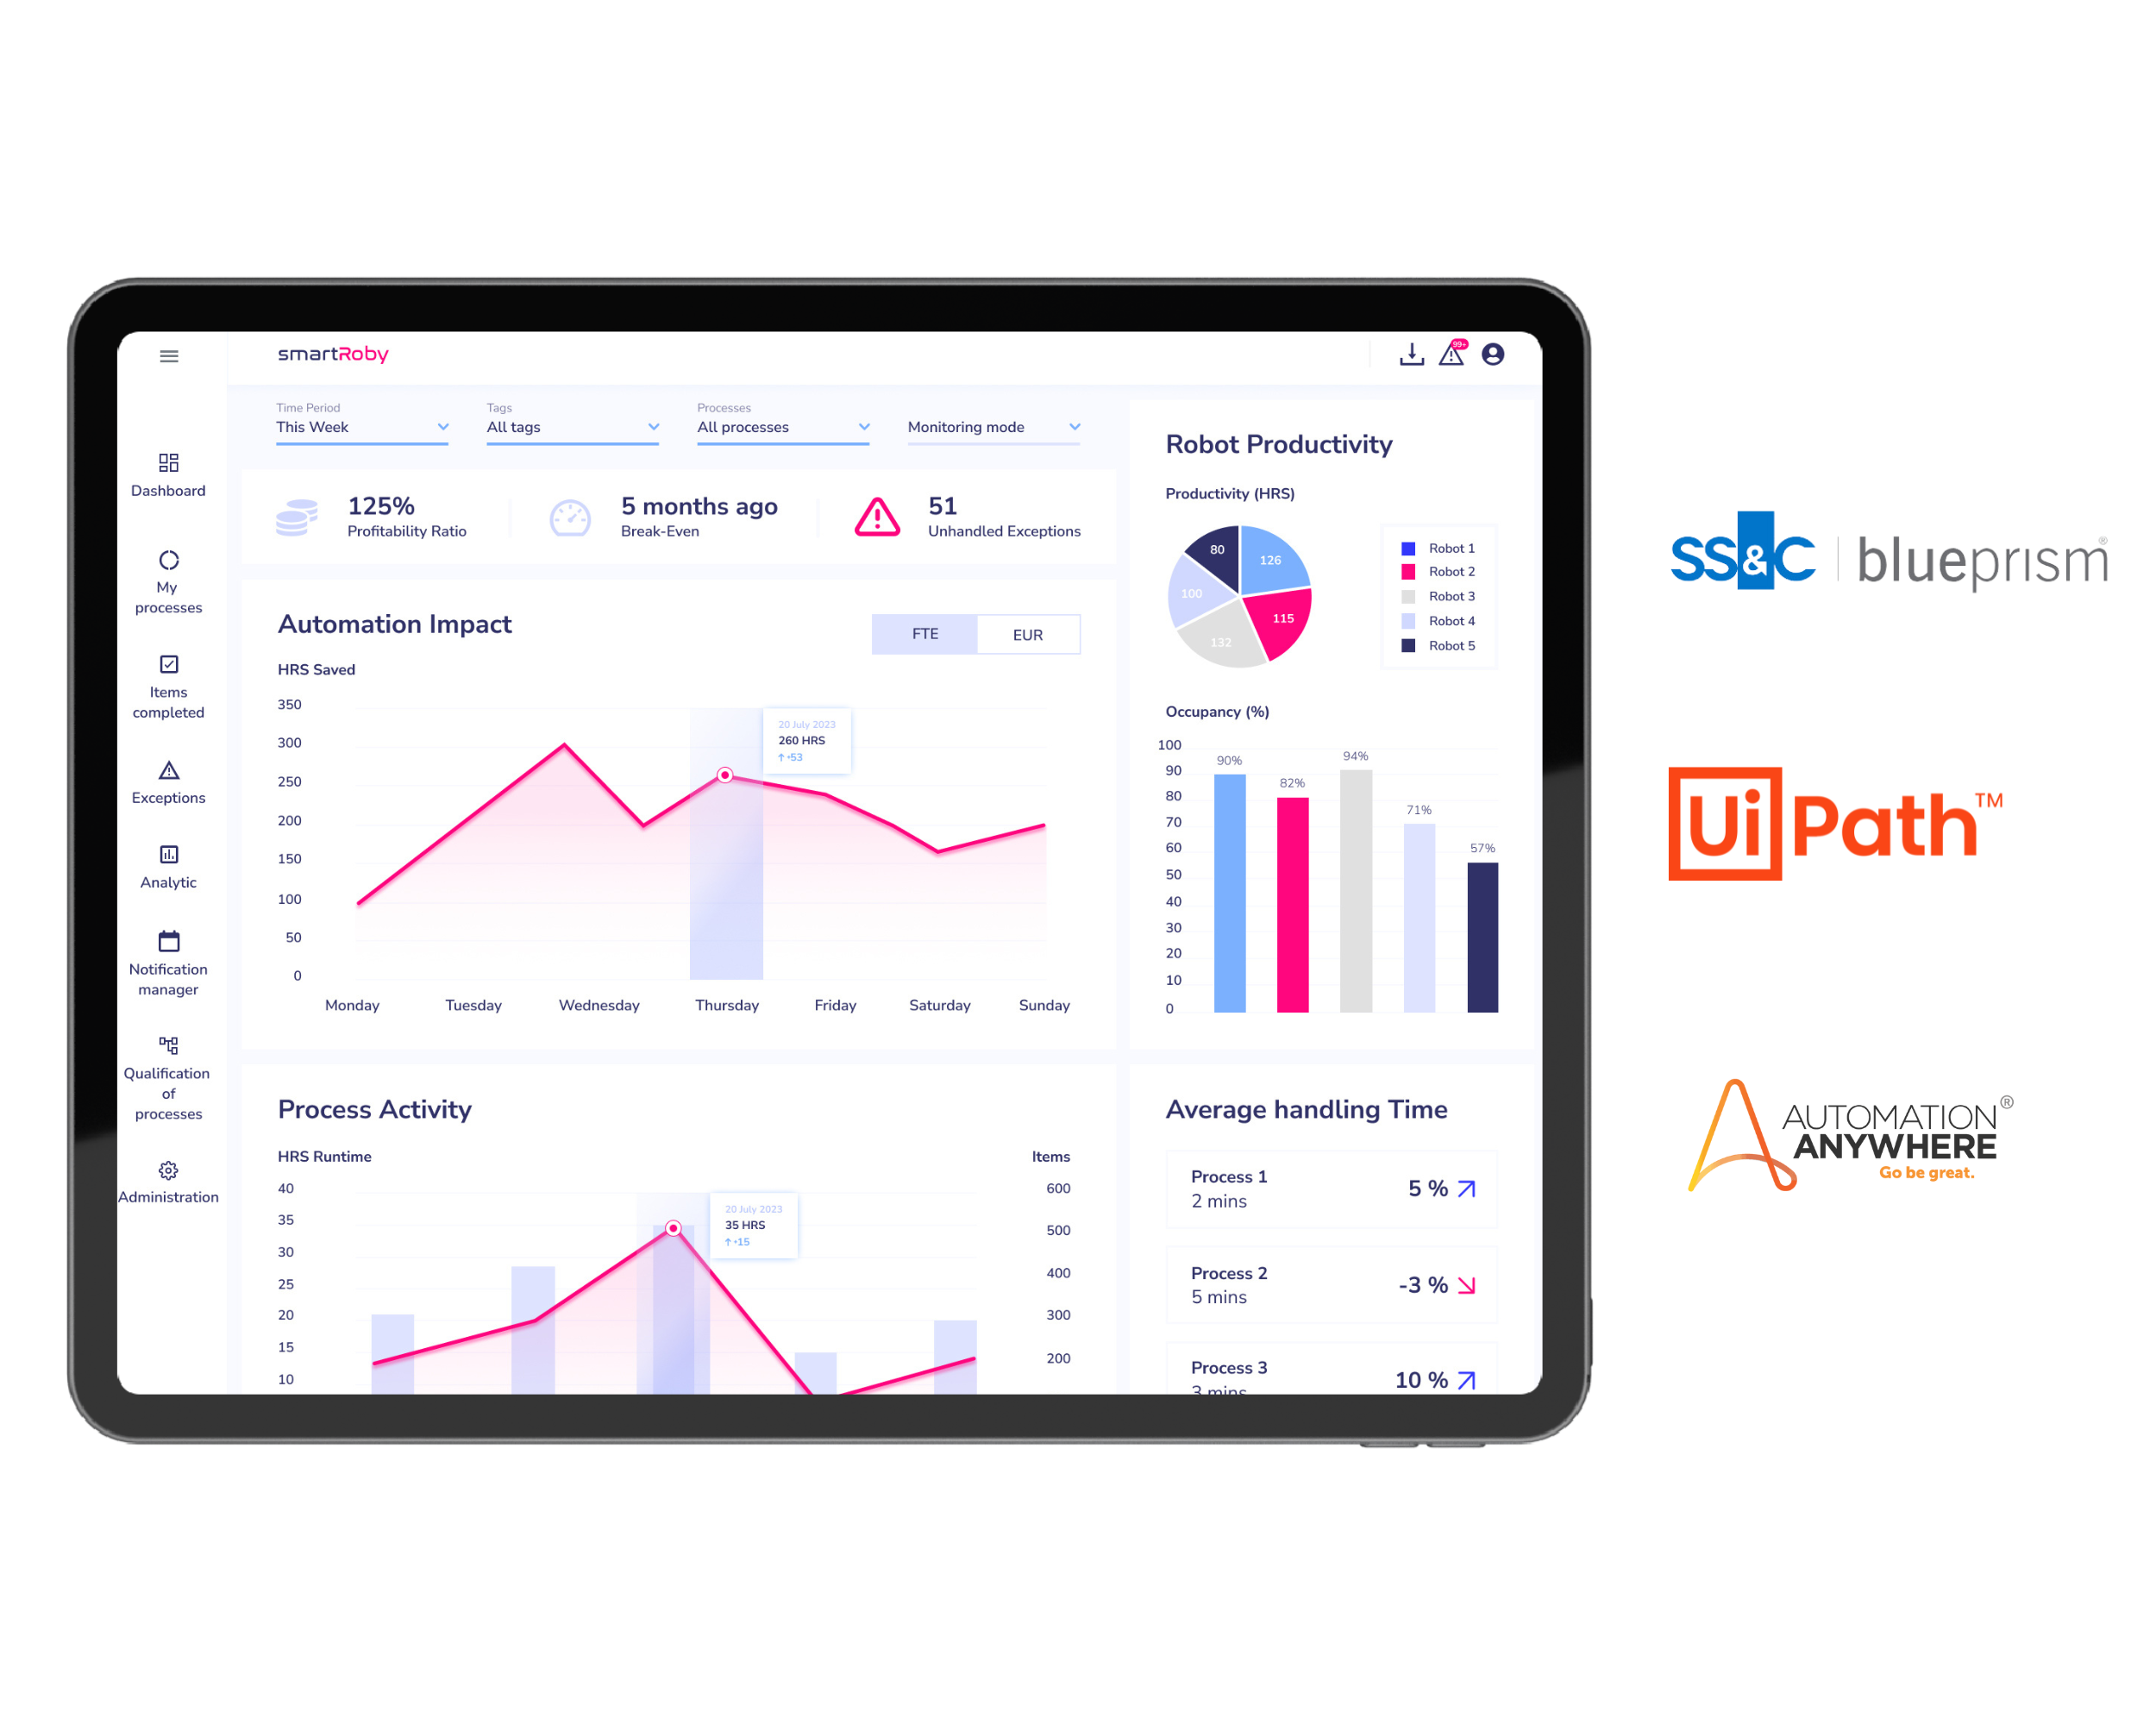 SmartRoby Plateform, BluePrism, UIPATH, Automation anywhere